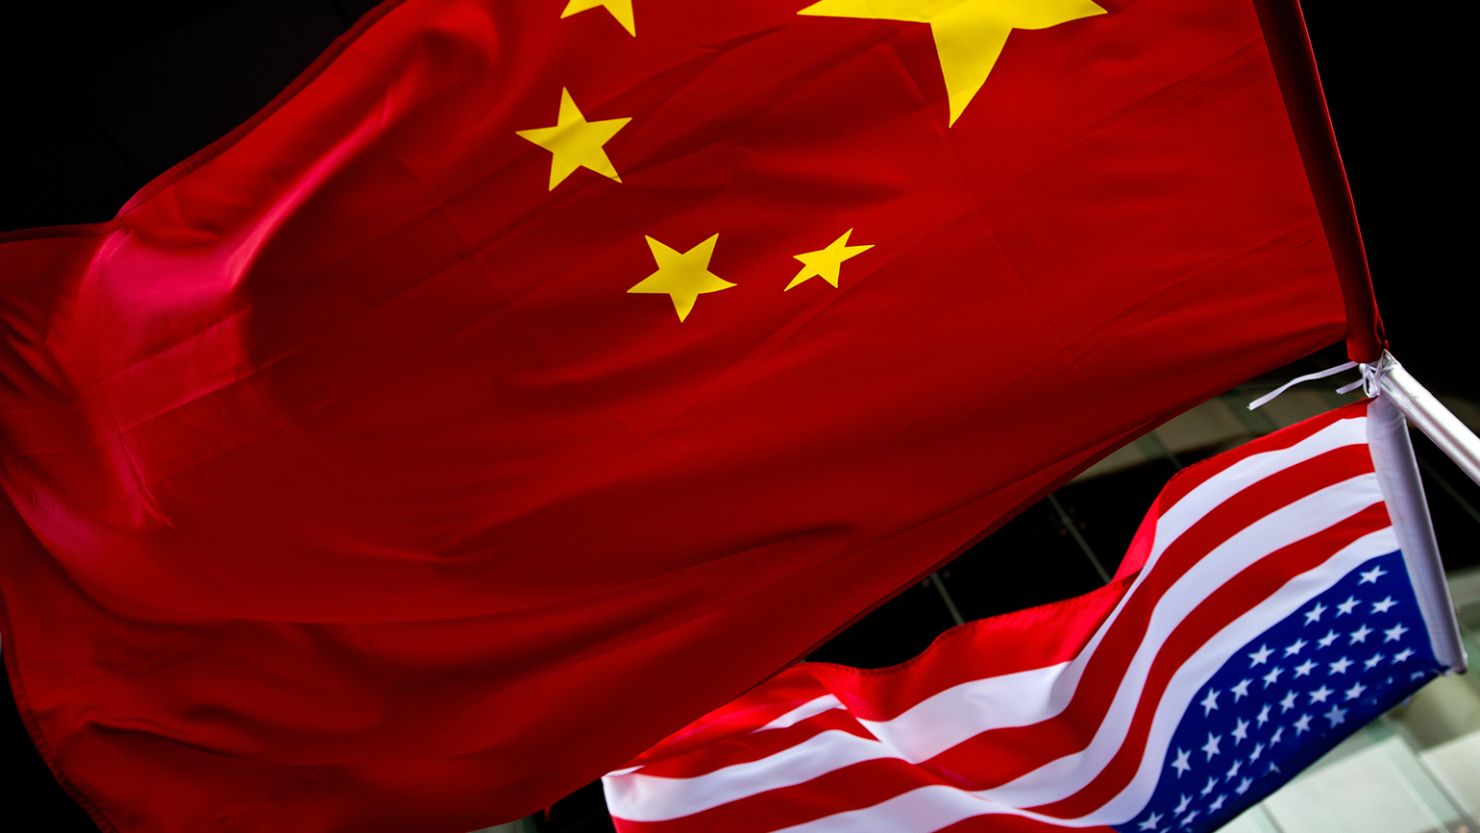 U.S. and Chinese national flags are seen outside a hotel in Beijing on November 7, 2012.